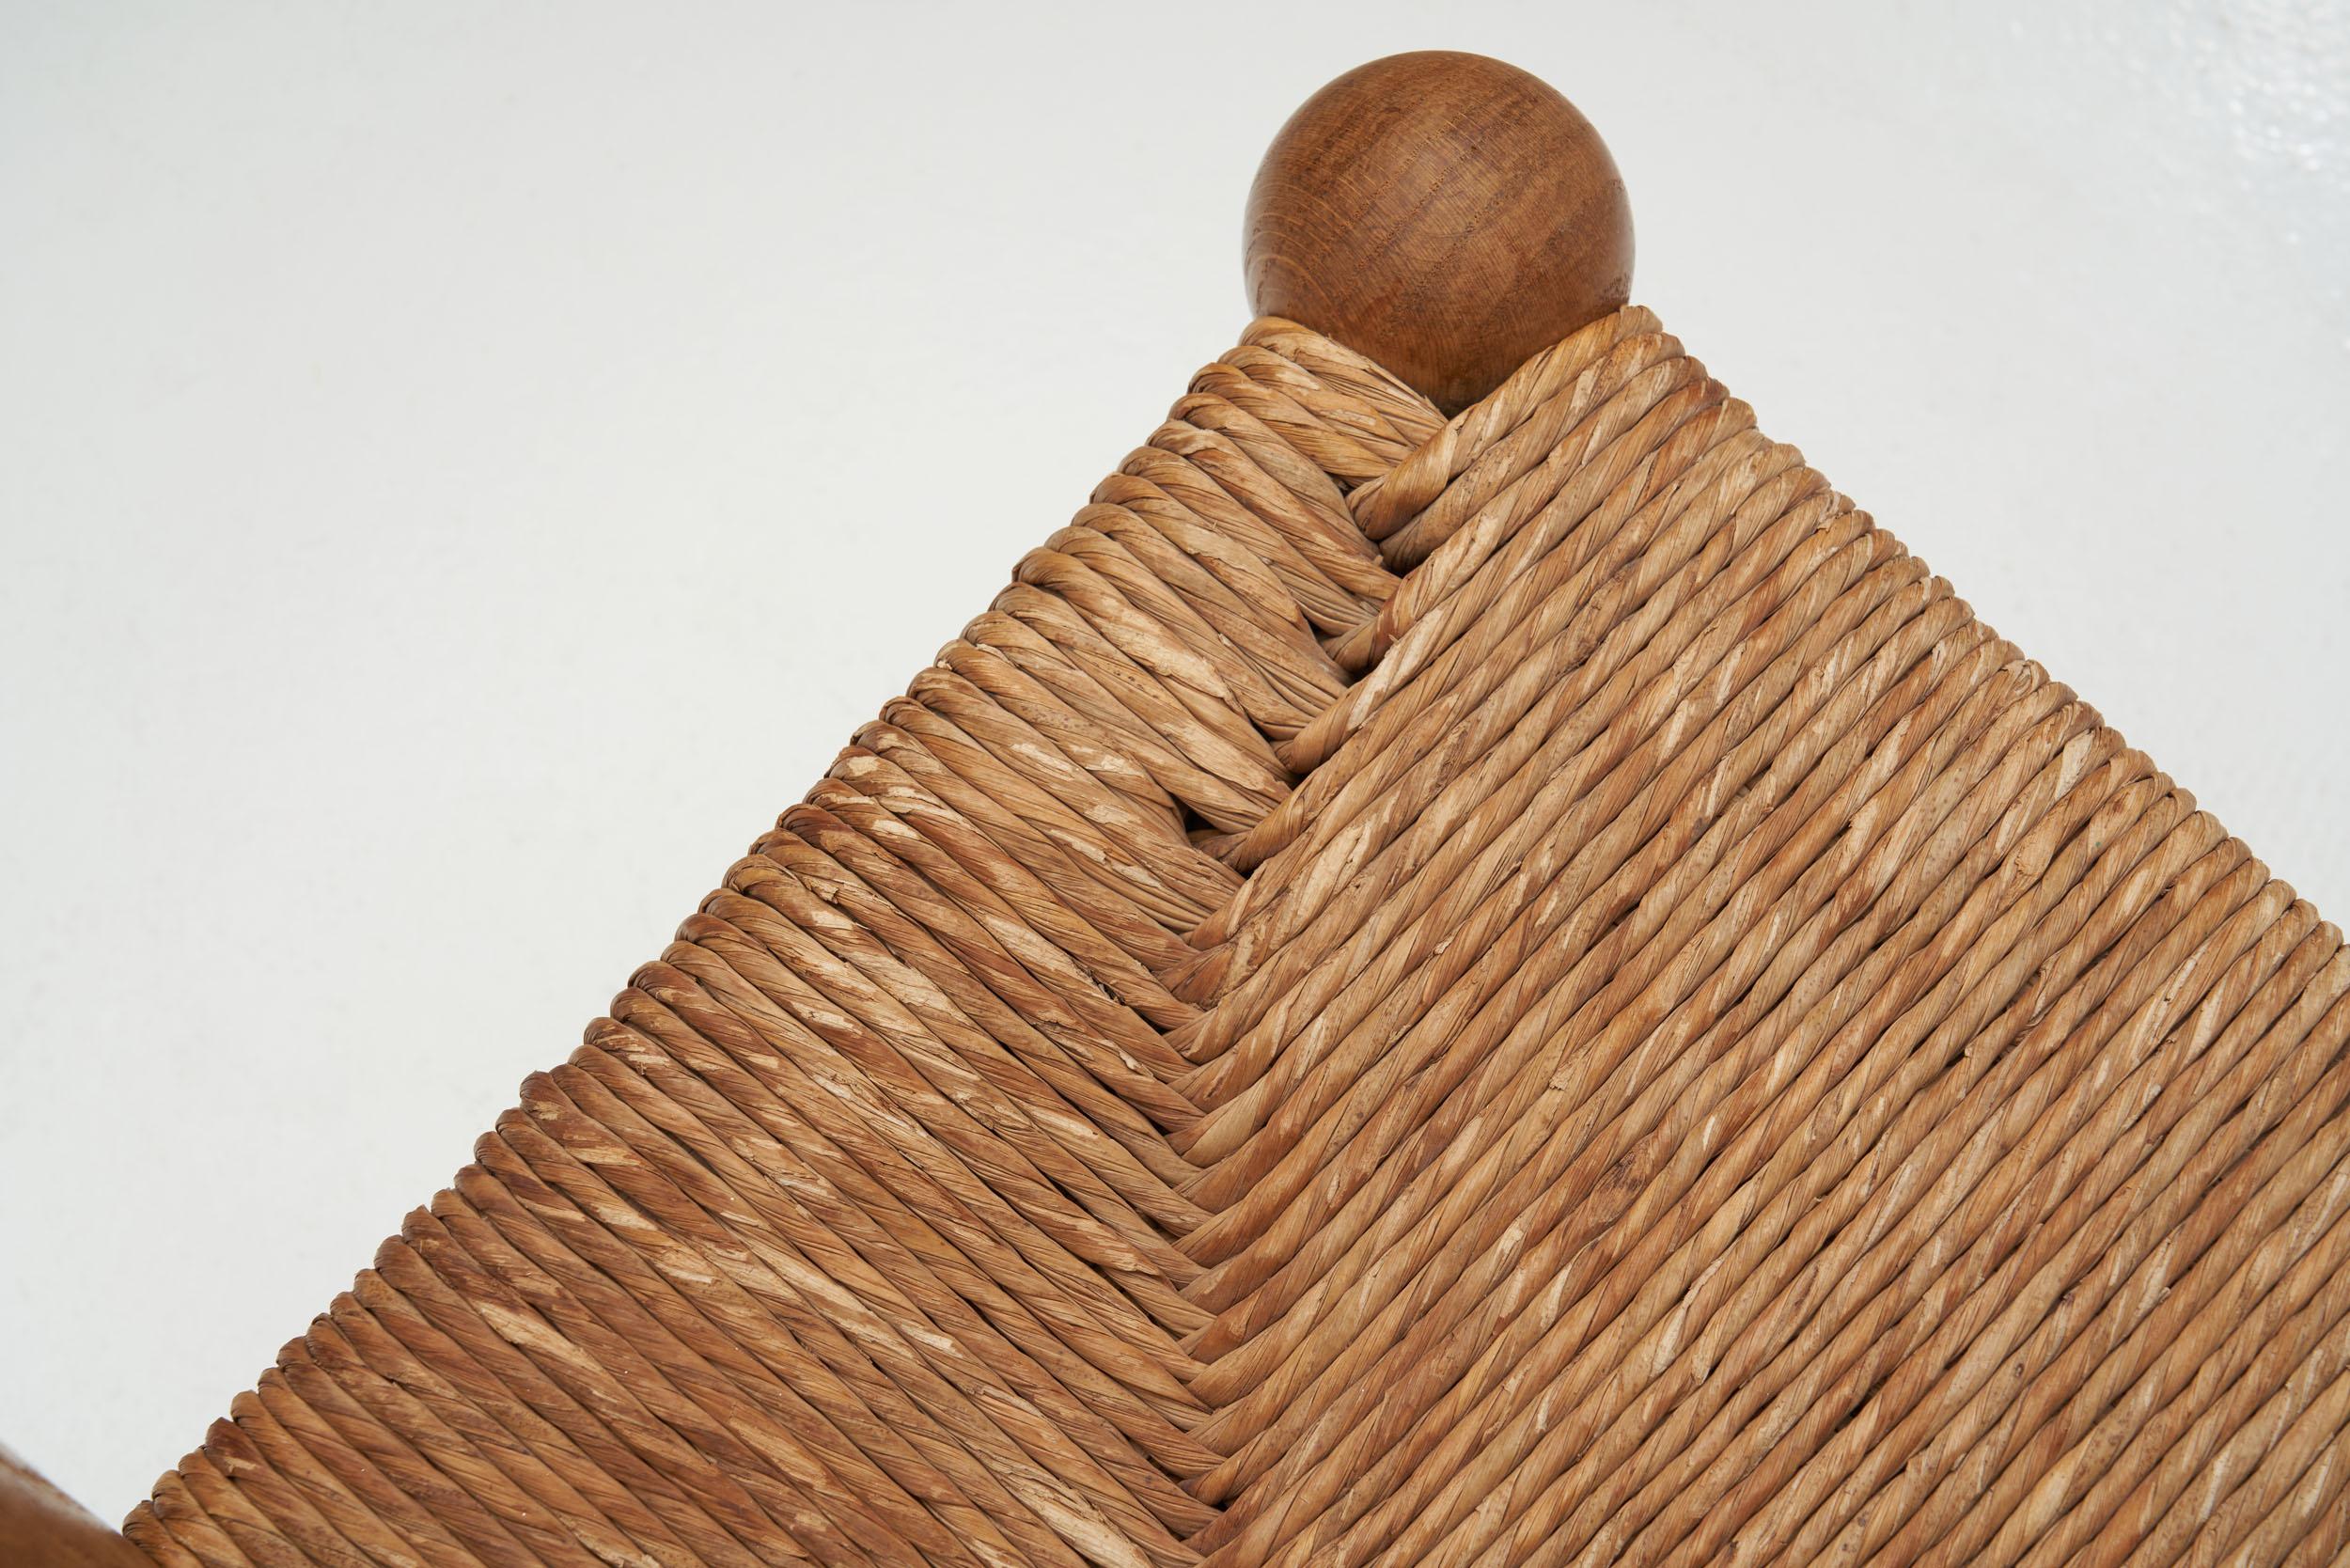 Small Wood and Wicker Chair by a European Cabinetmaker, Europe, Ca 1950s For Sale 10